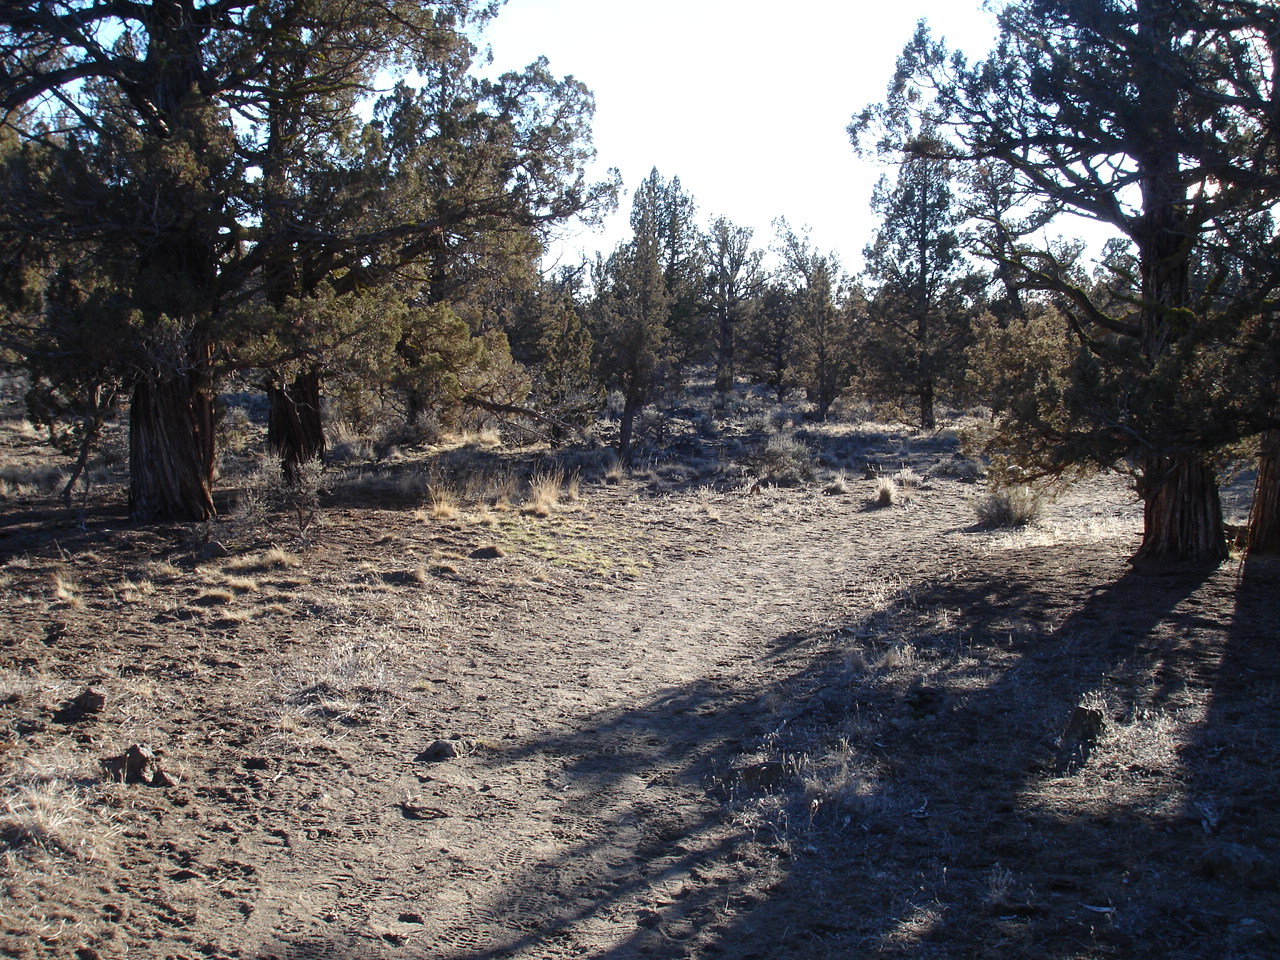 a view of a desert scene with many trees